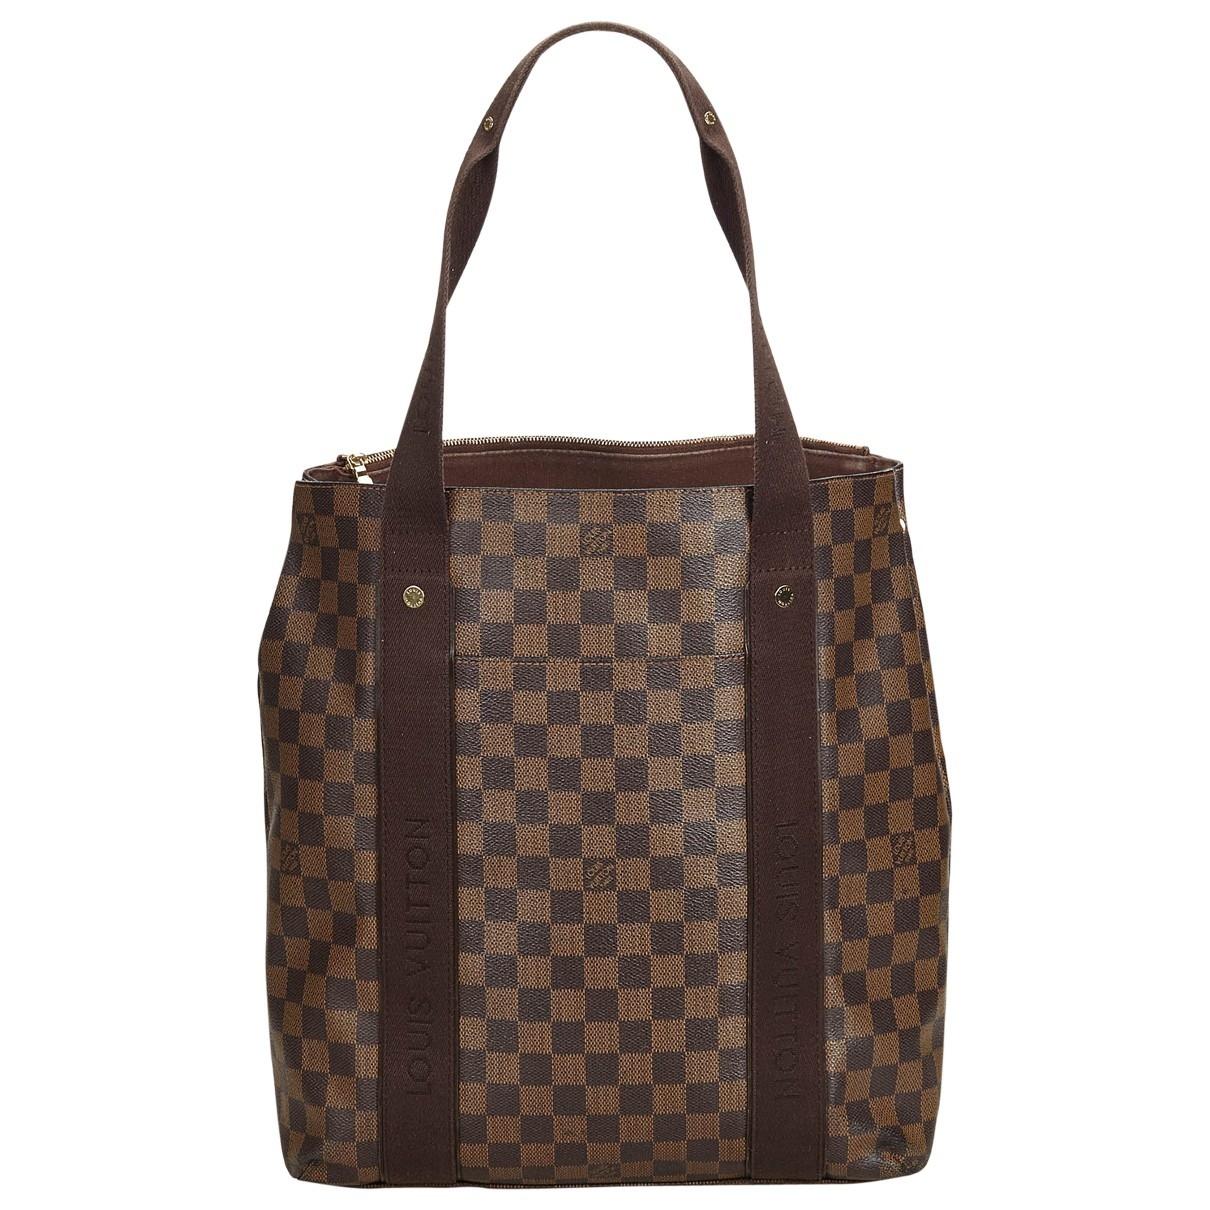 Louis Vuitton Beaubourg Tote in Brown - Lyst